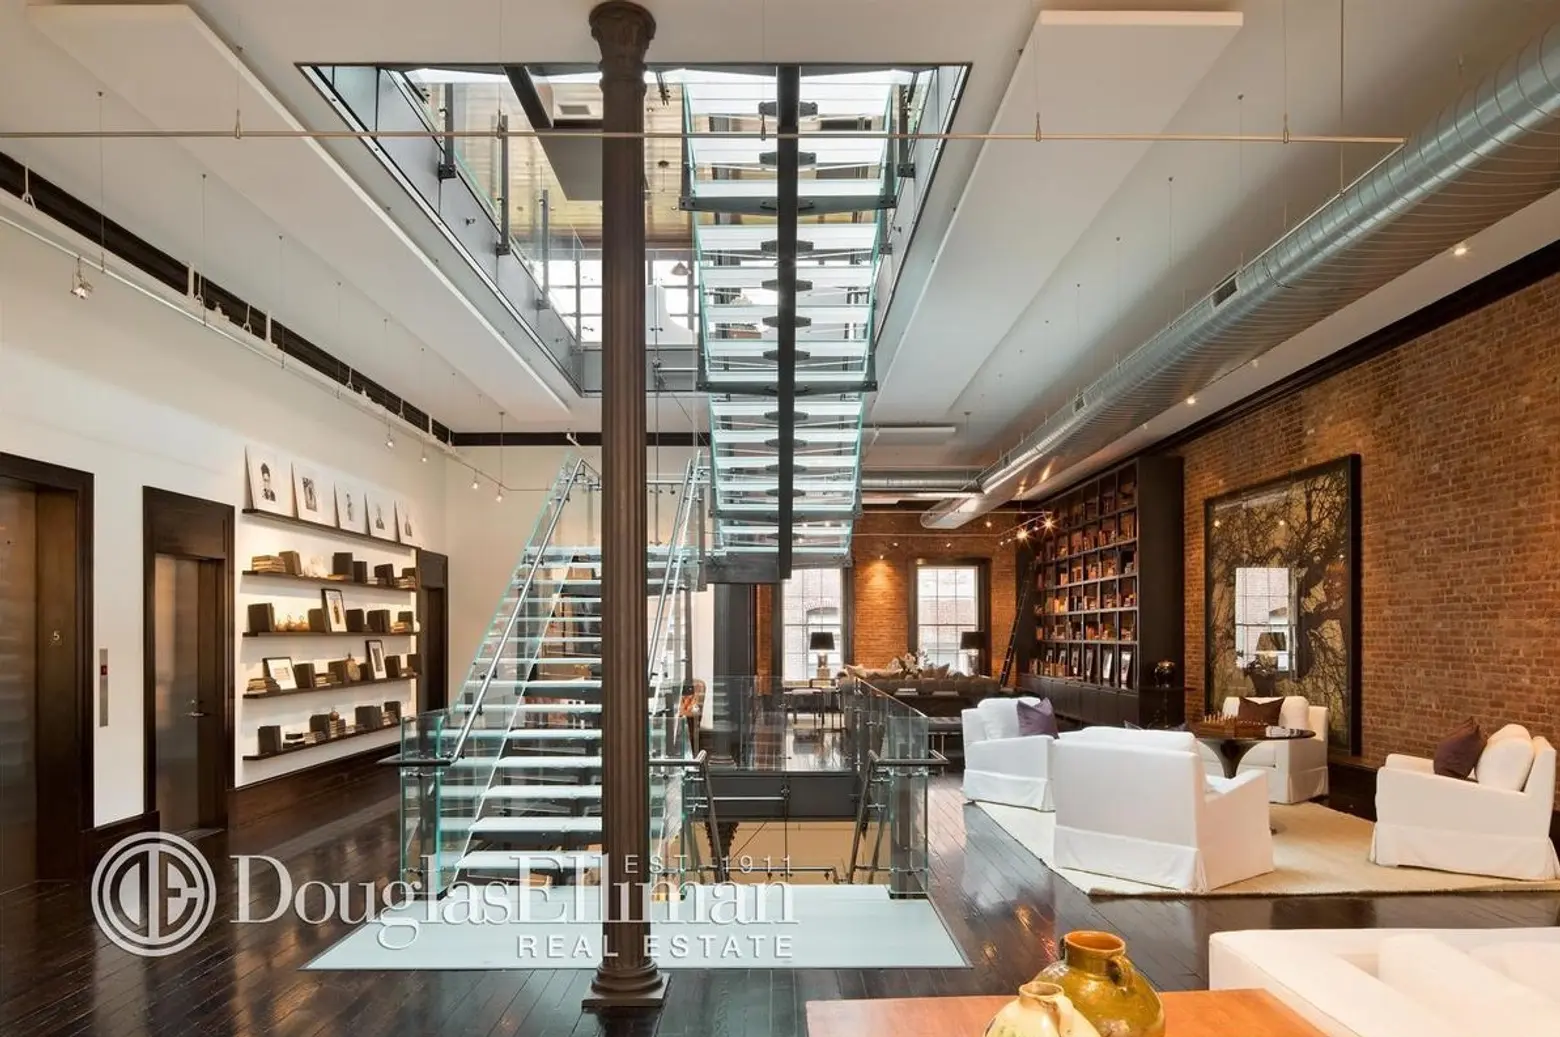 Former Tribeca Mansion Now Holds Spectacular Triplex Penthouse Asking $85,000 a Month